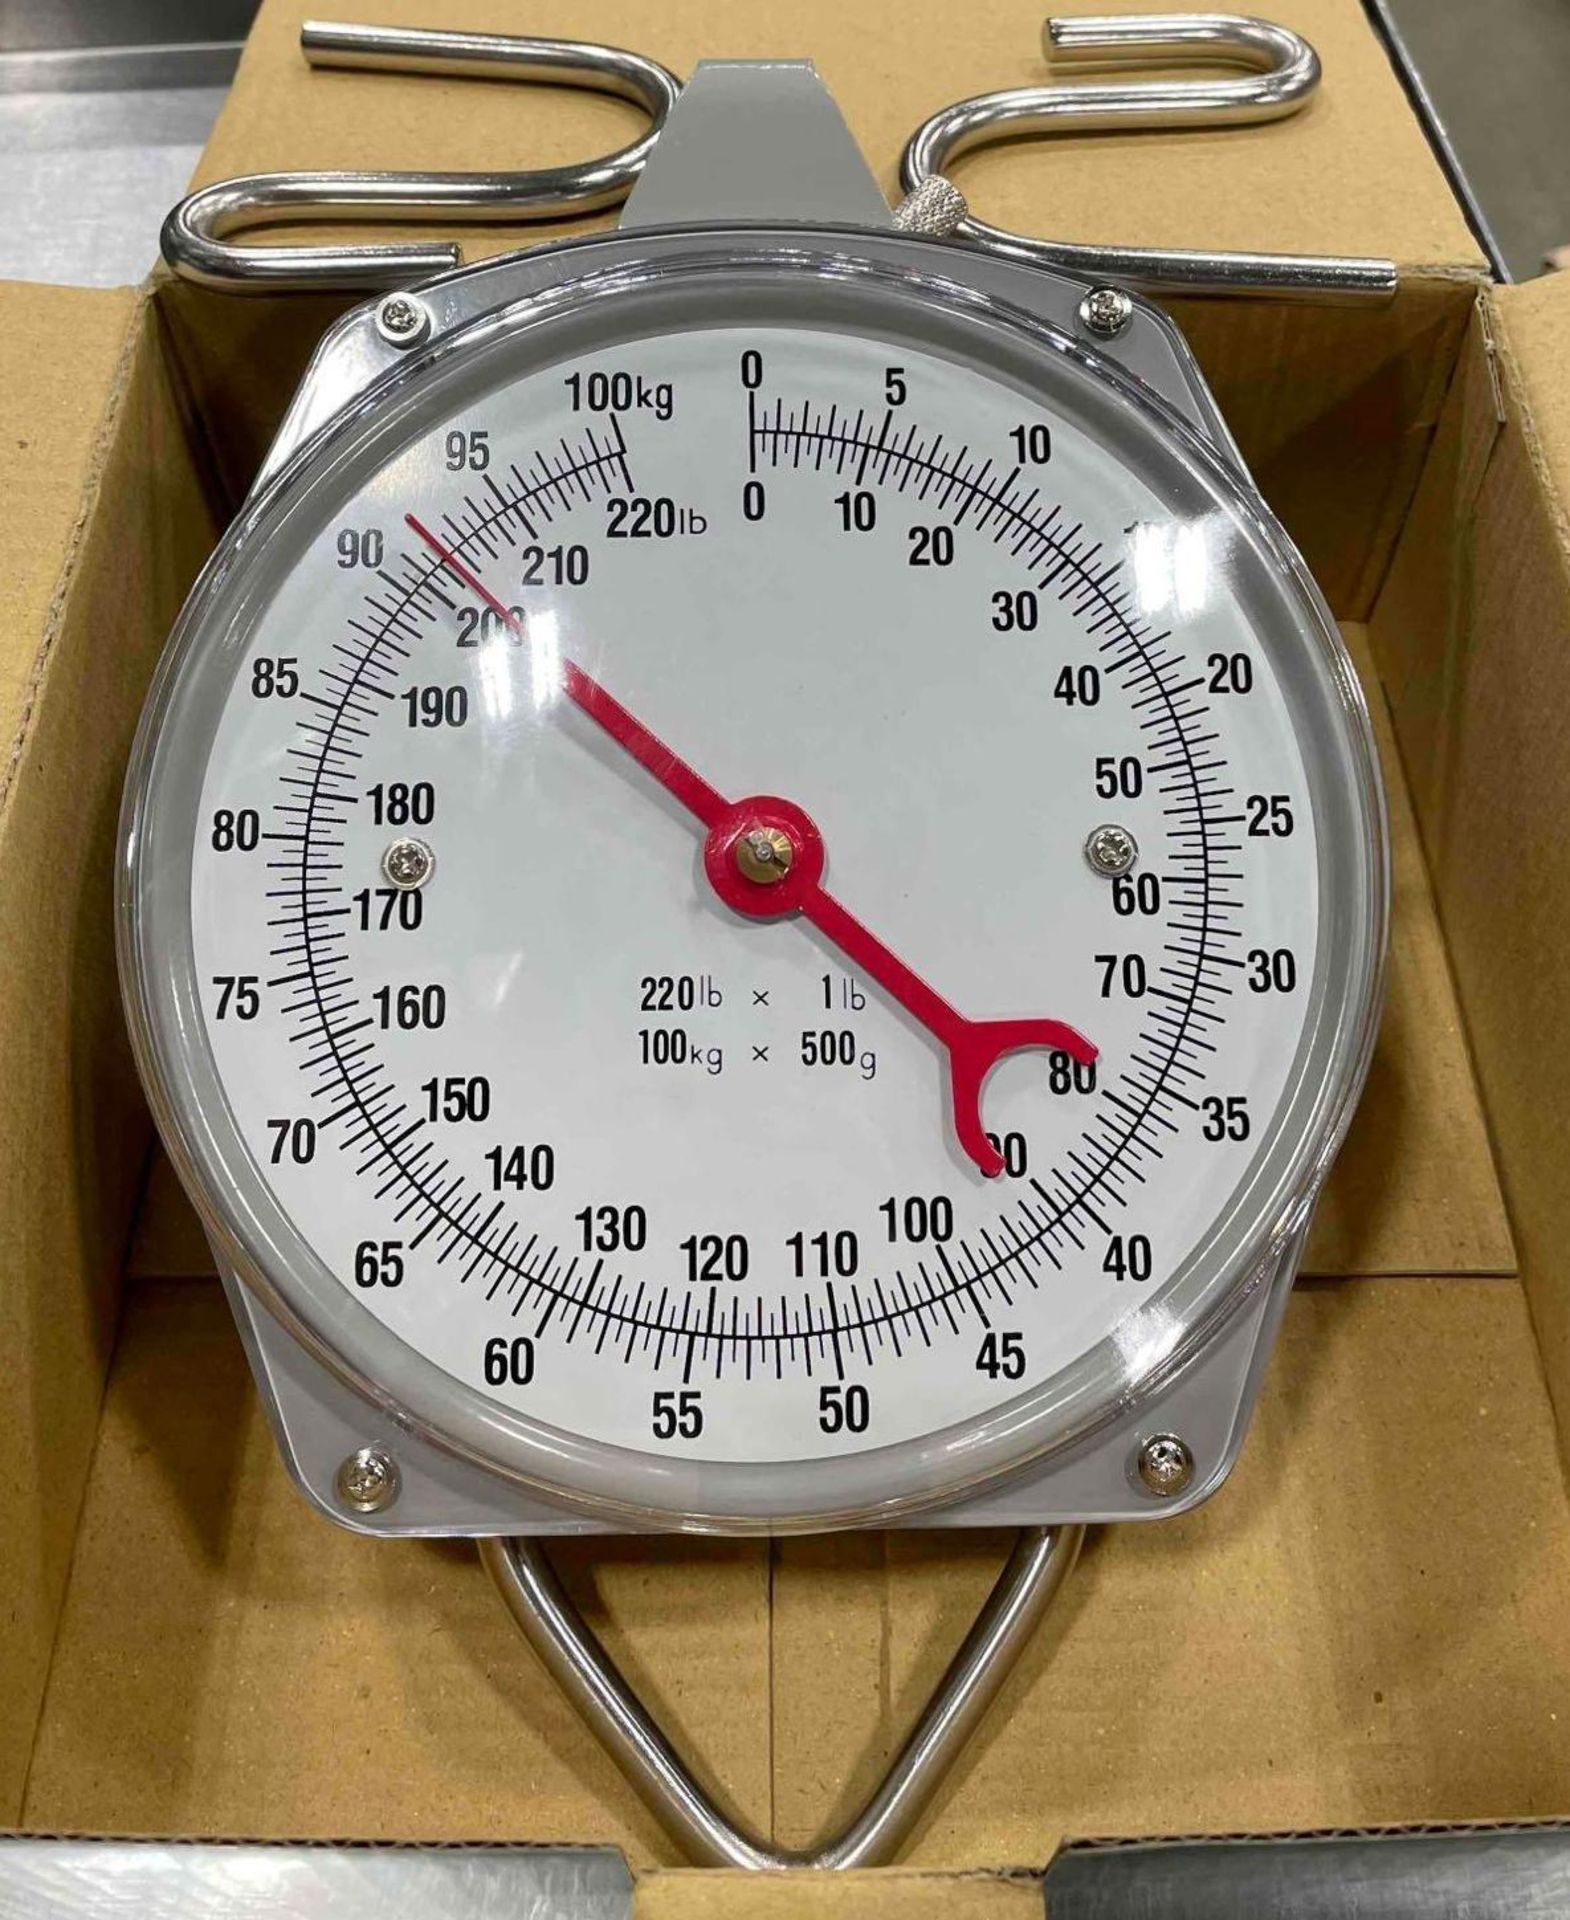 (2) NEW HANGING DIAL SCALE - 100 KG - NEW - Image 3 of 4